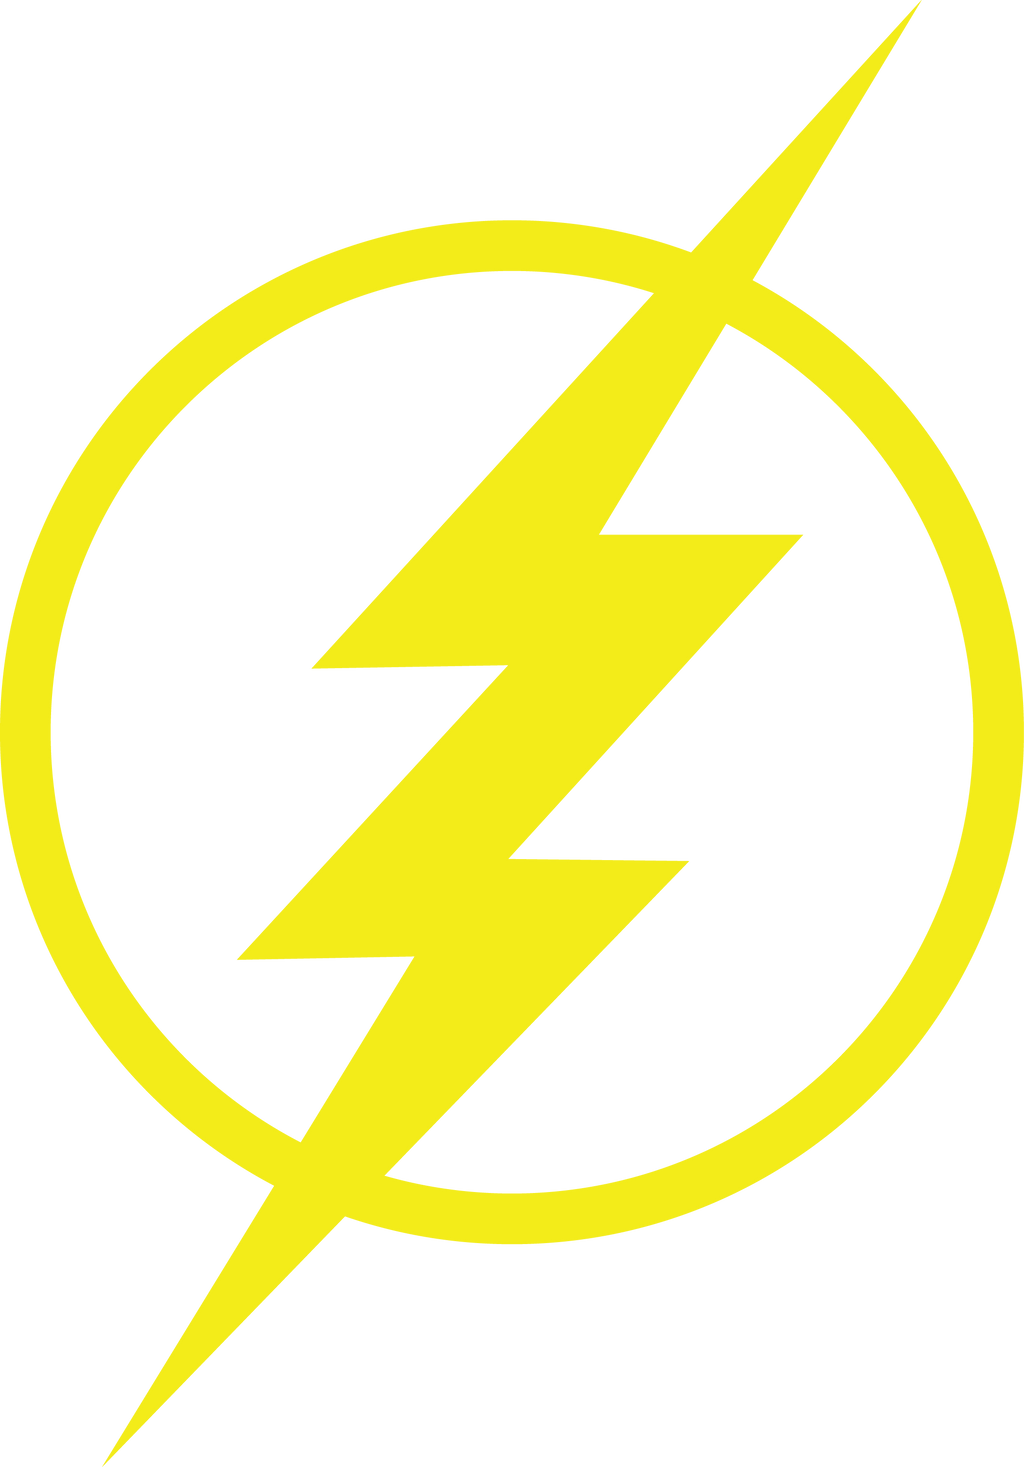 The Flash Logo by thulung9 on DeviantArt